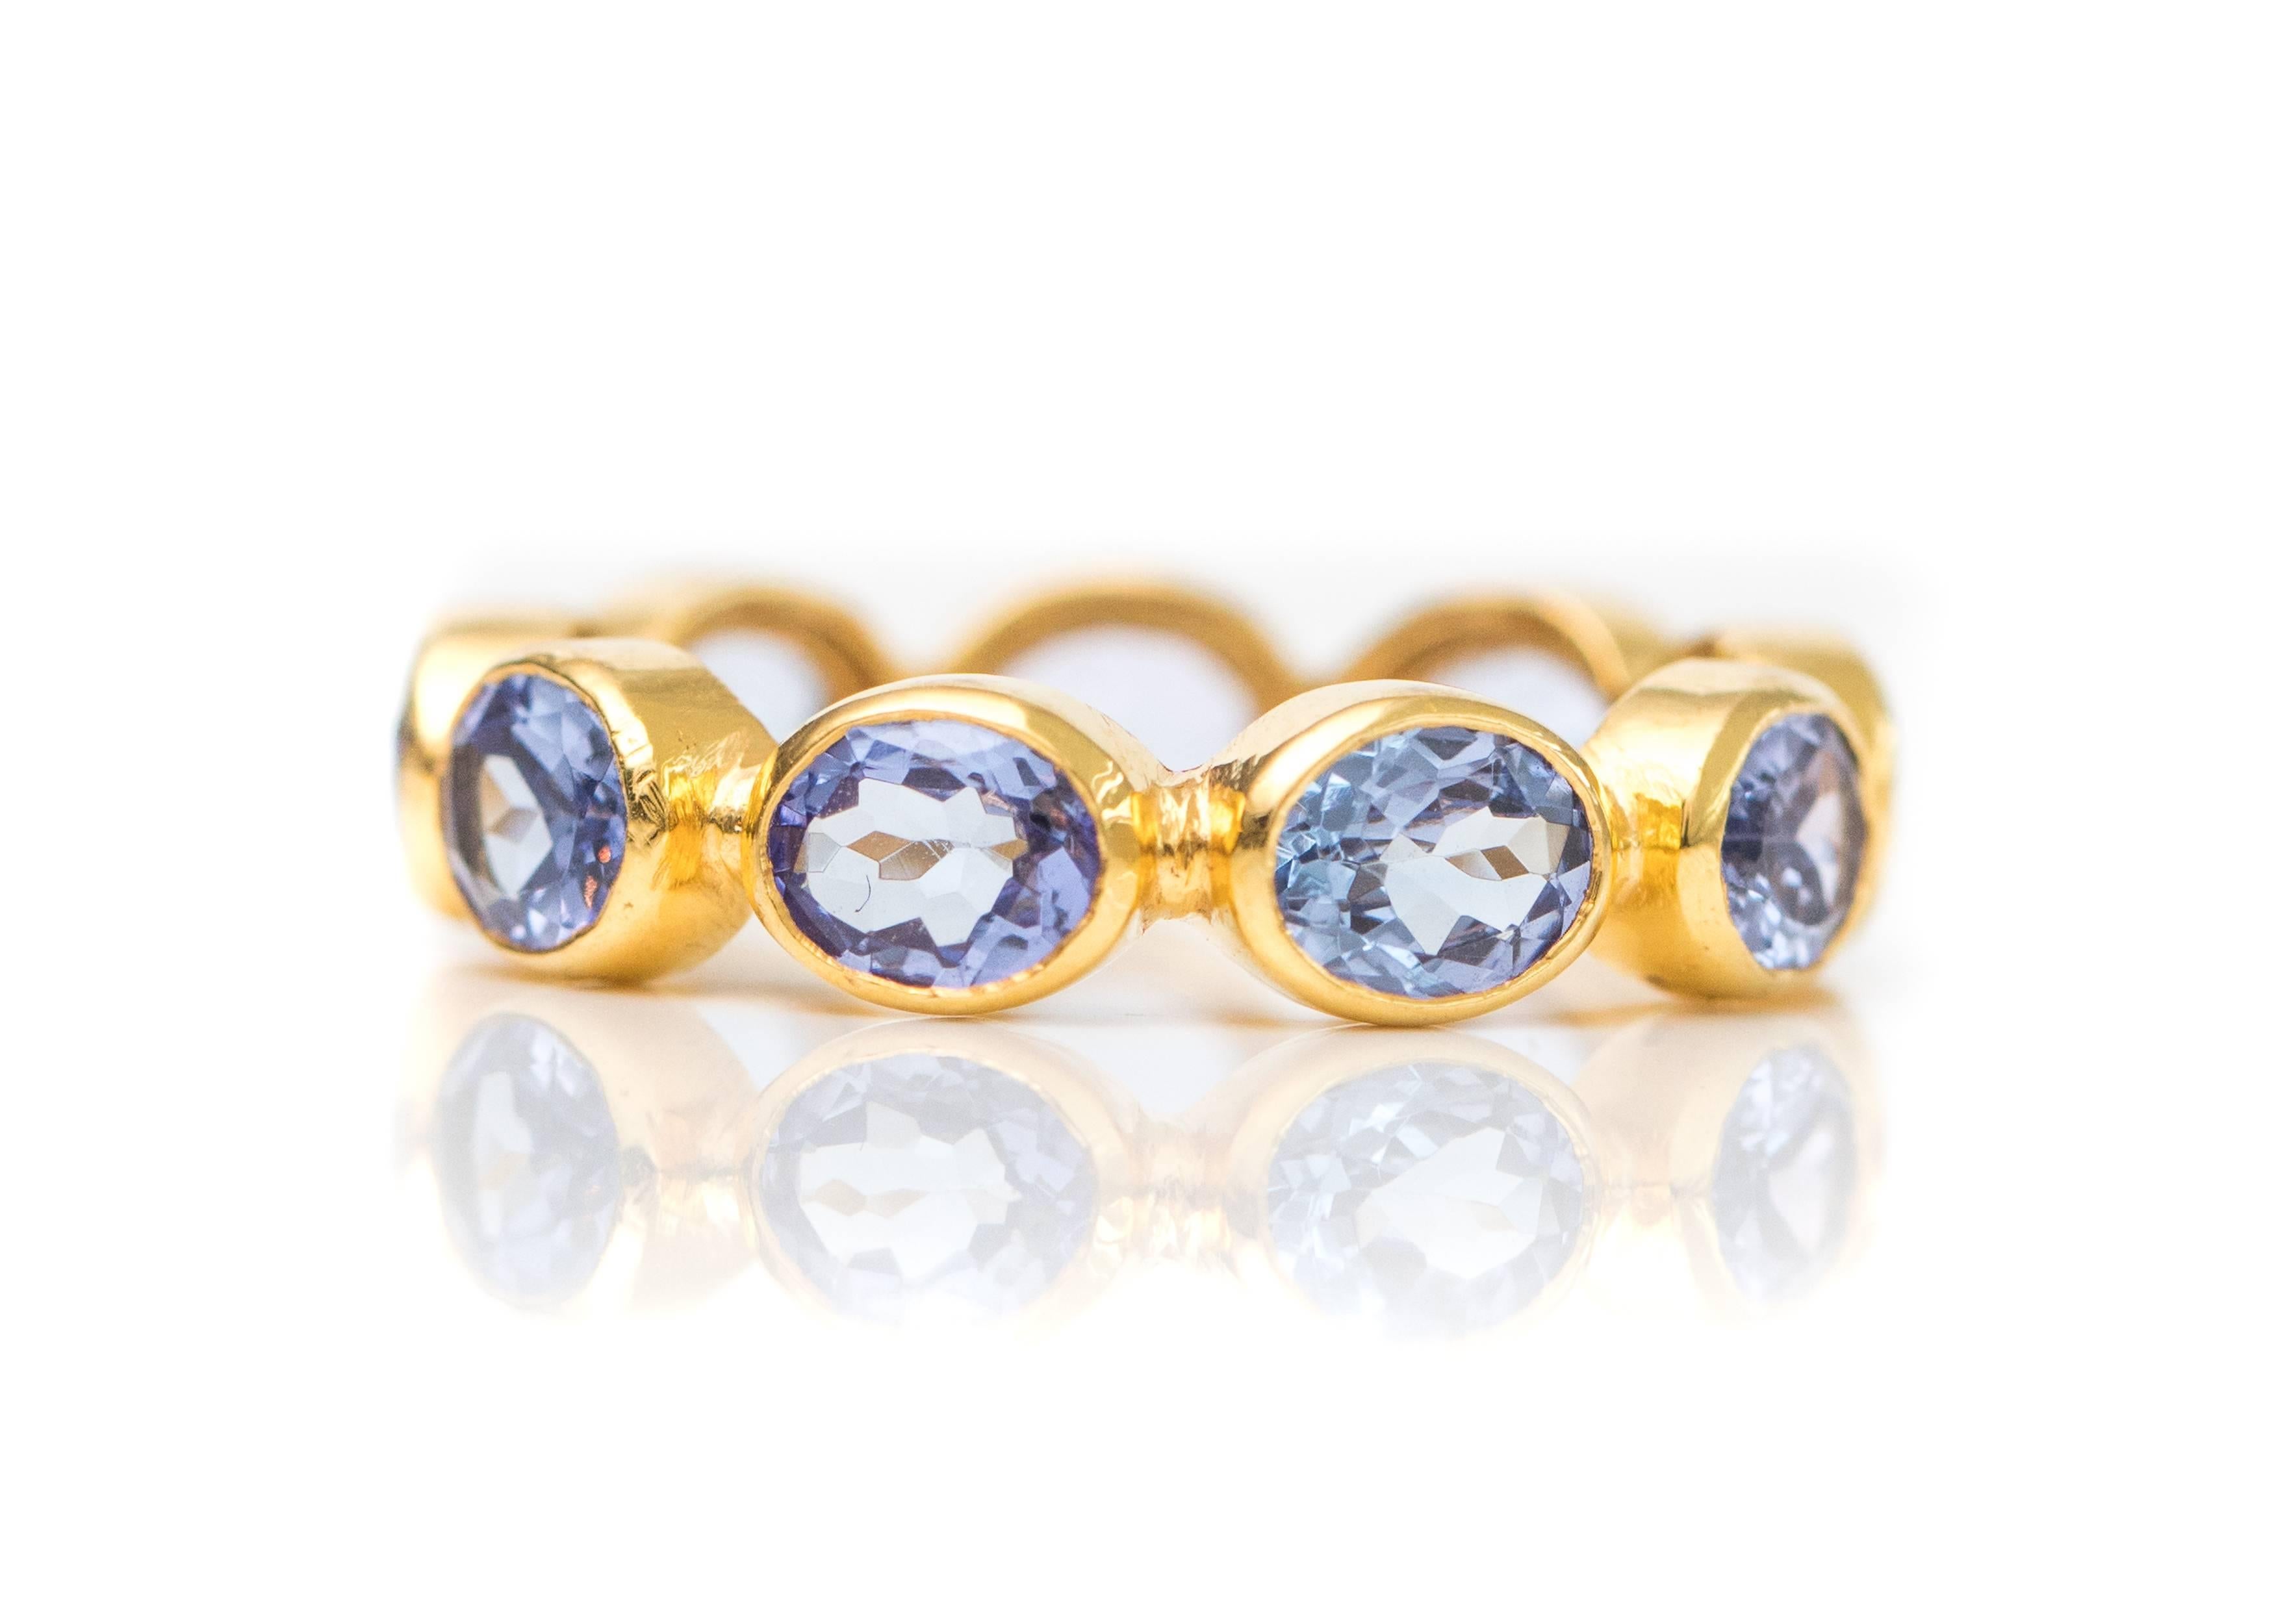 2.0 Carat Tanzanite and 18 Karat Yellow Gold Eternity Band

Features a ring of Violet Blue Tanzanite in 18 Karat Yellow Gold. The Oval Brilliant gemstones are set in an East-West direction. Each stone is bezel set in 18 Karat Yellow Gold. The sides